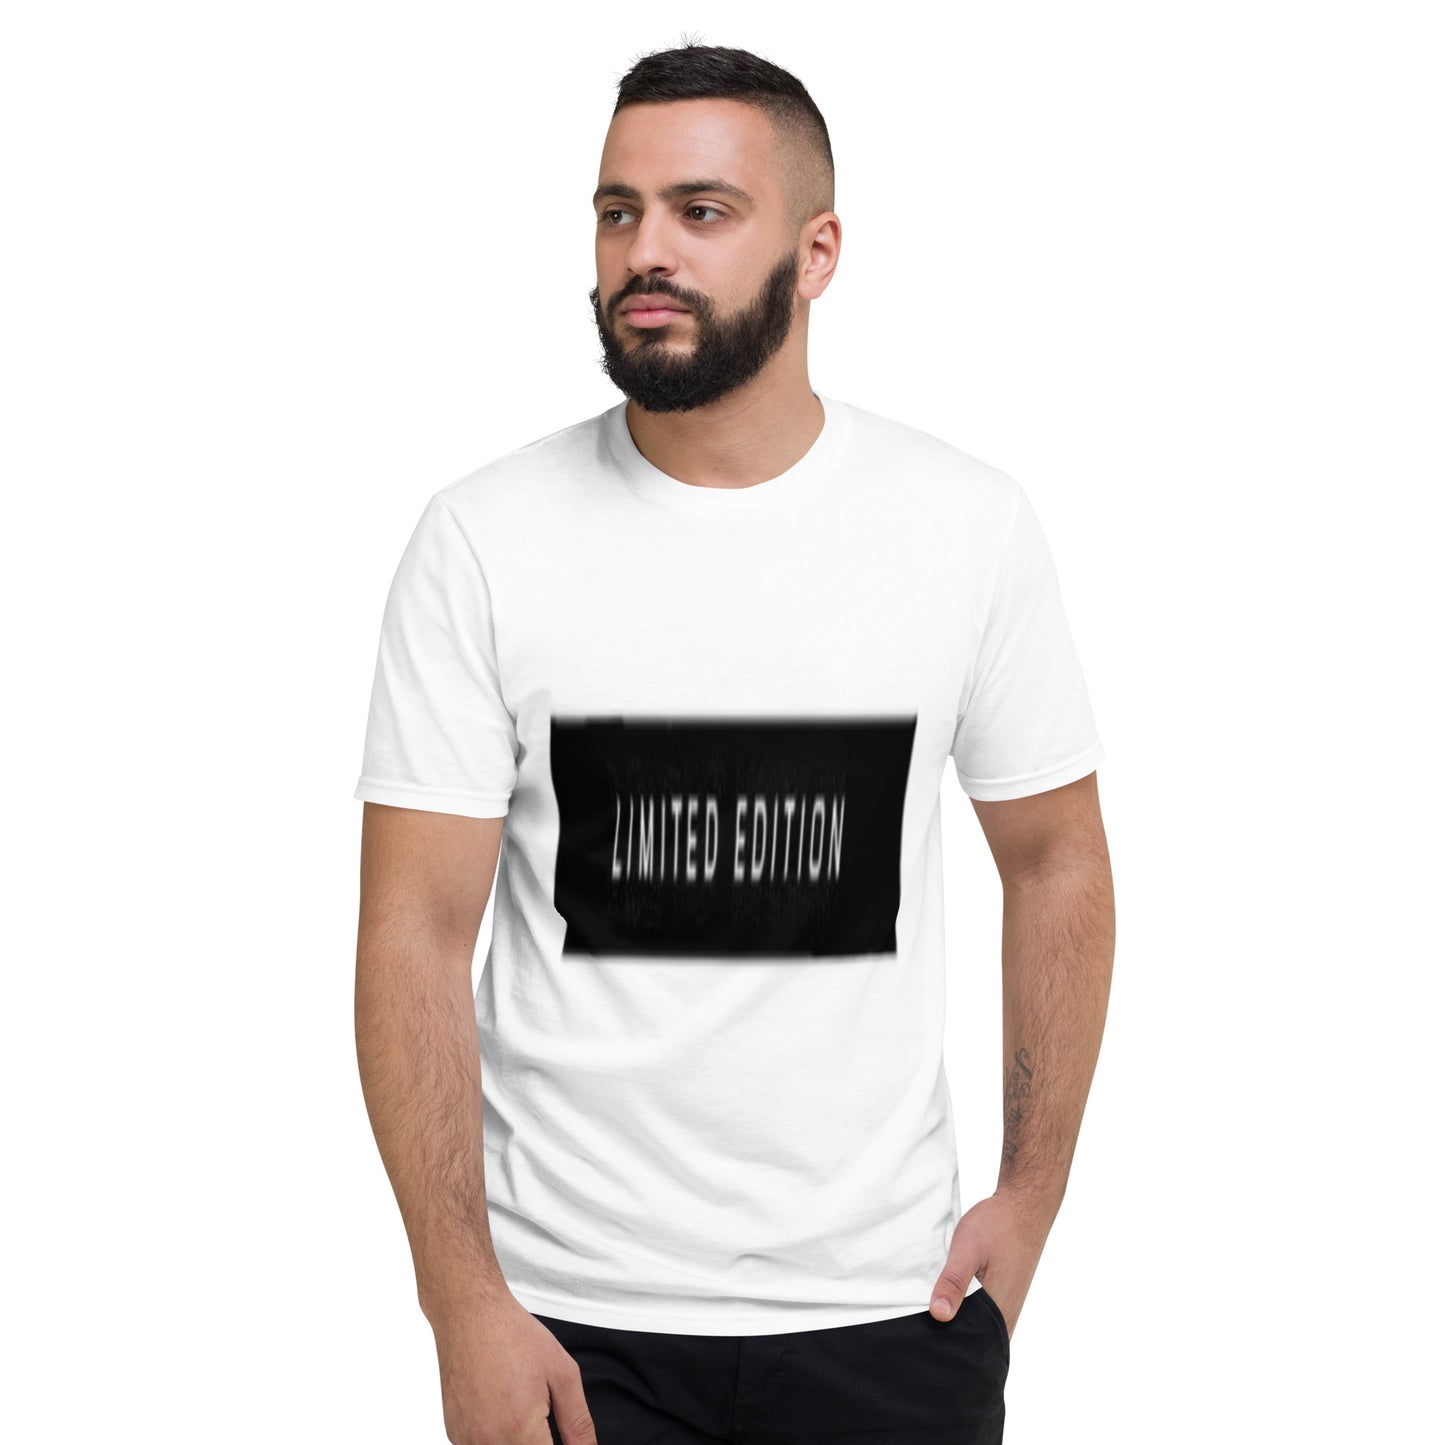 Limited Edition Short-Sleeve T-Shirt